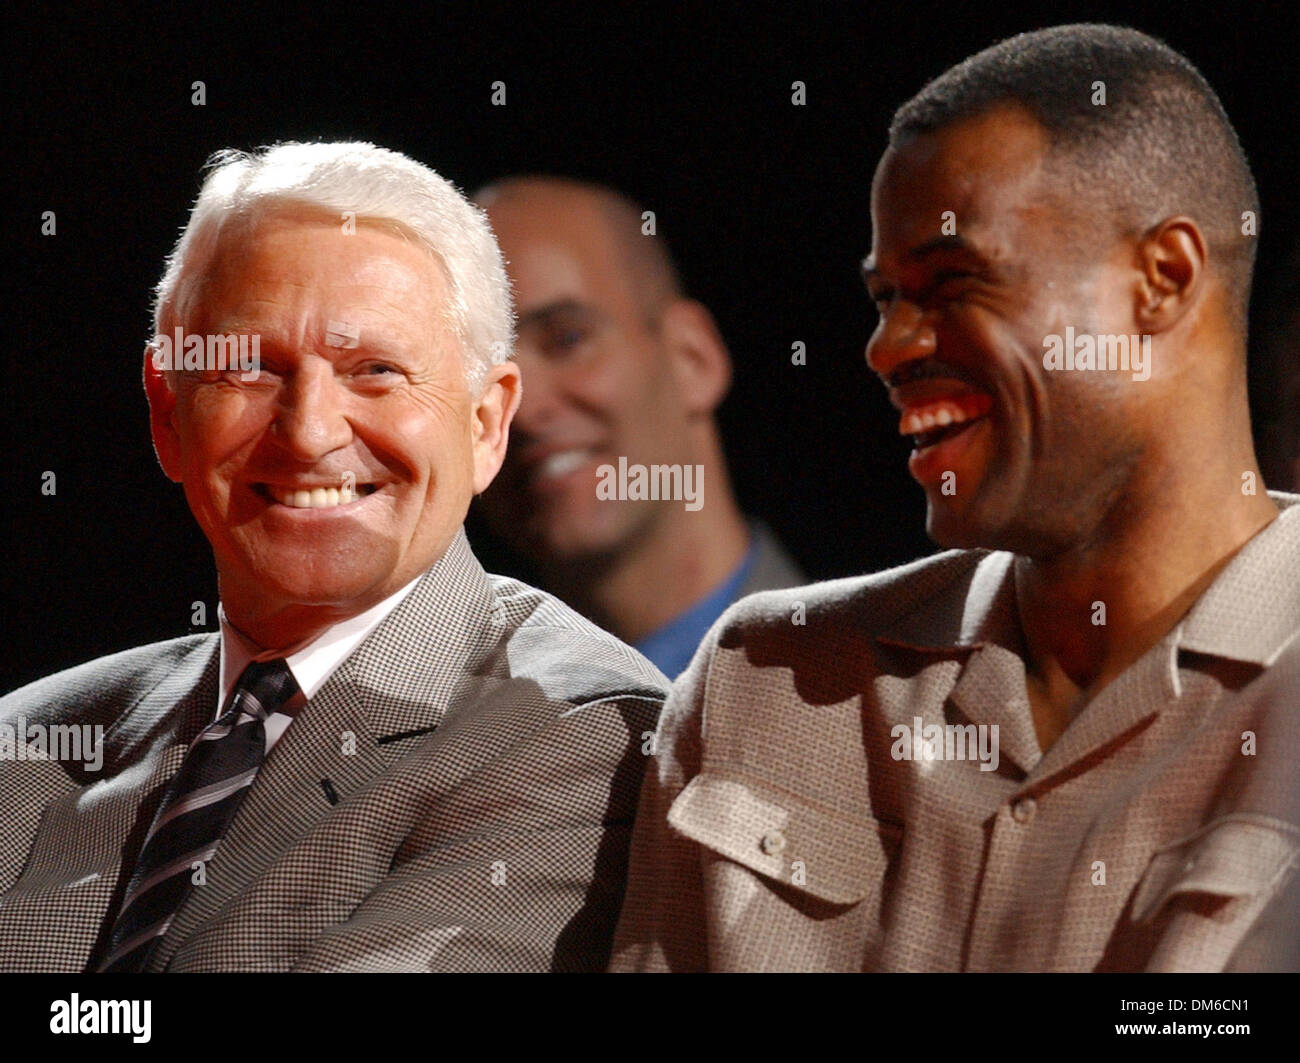 Mar 06, 2005; San Antonio, TX, USA; Arizona coach LUTE OLSON laughs with former Spurs' player DAVID ROBINSON during the retirement of Sean Elliott's jersey at the SBC Center. Stock Photo